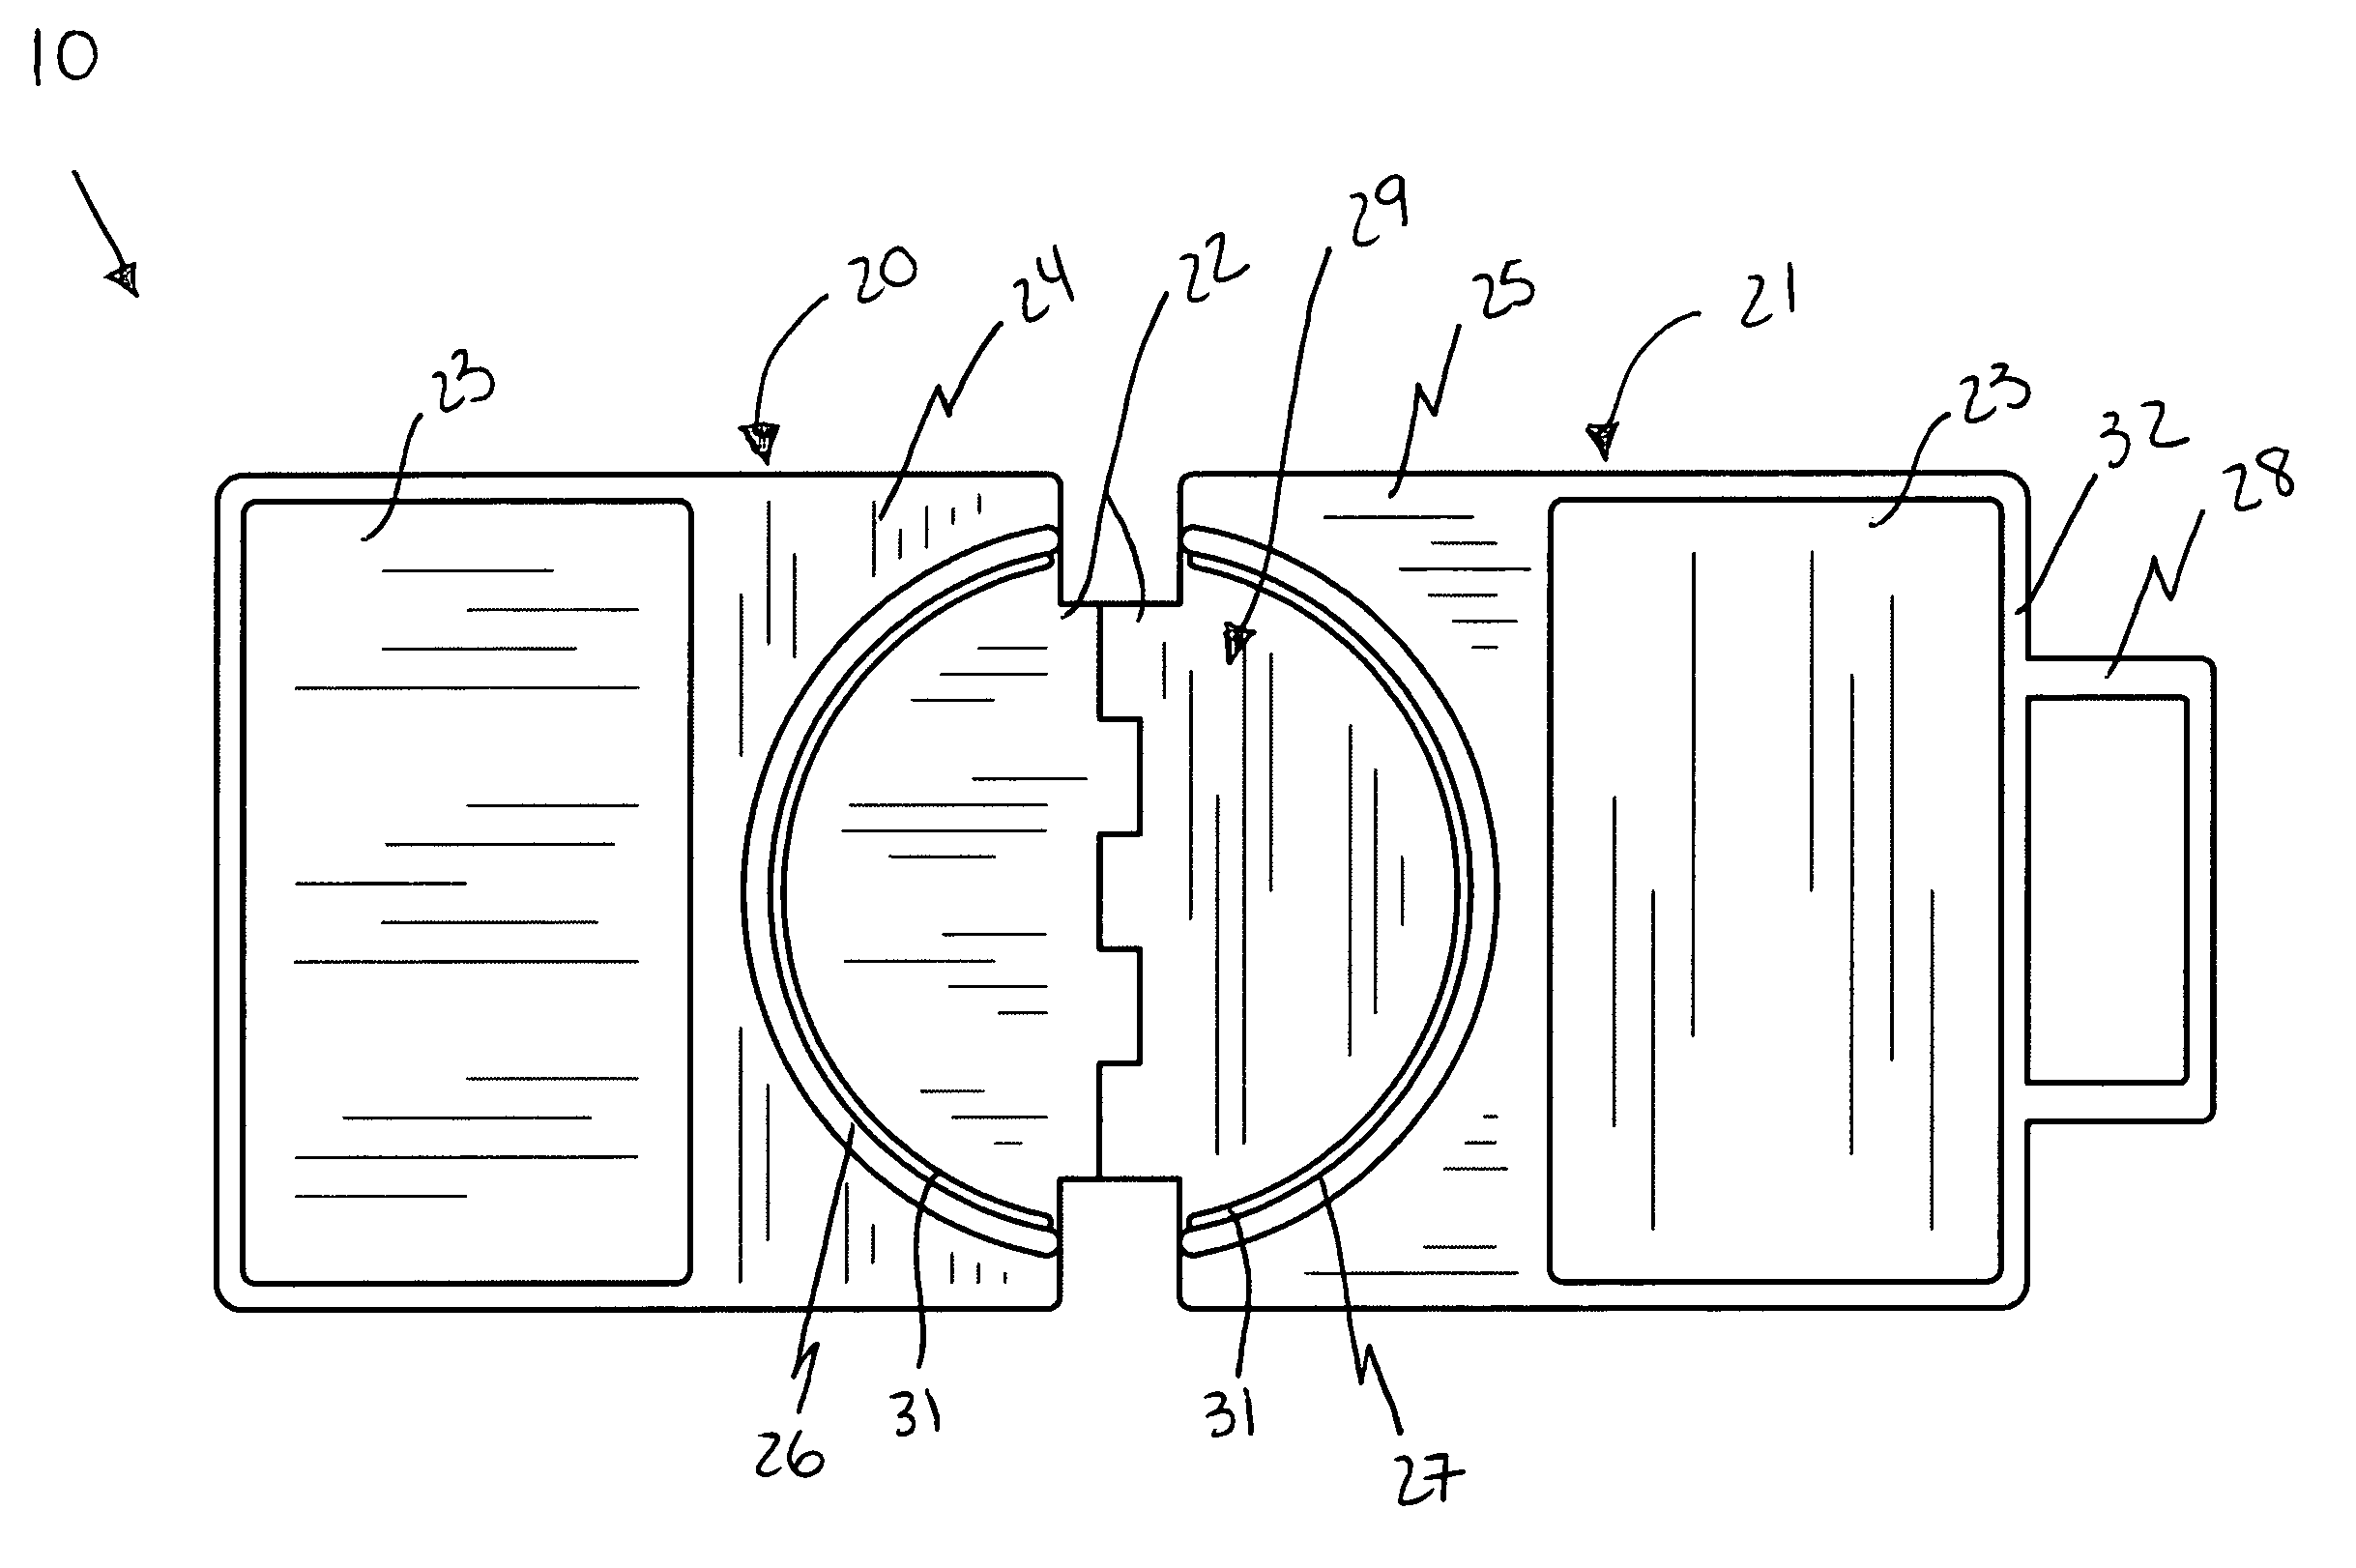 Bucket holding apparatus and associated method